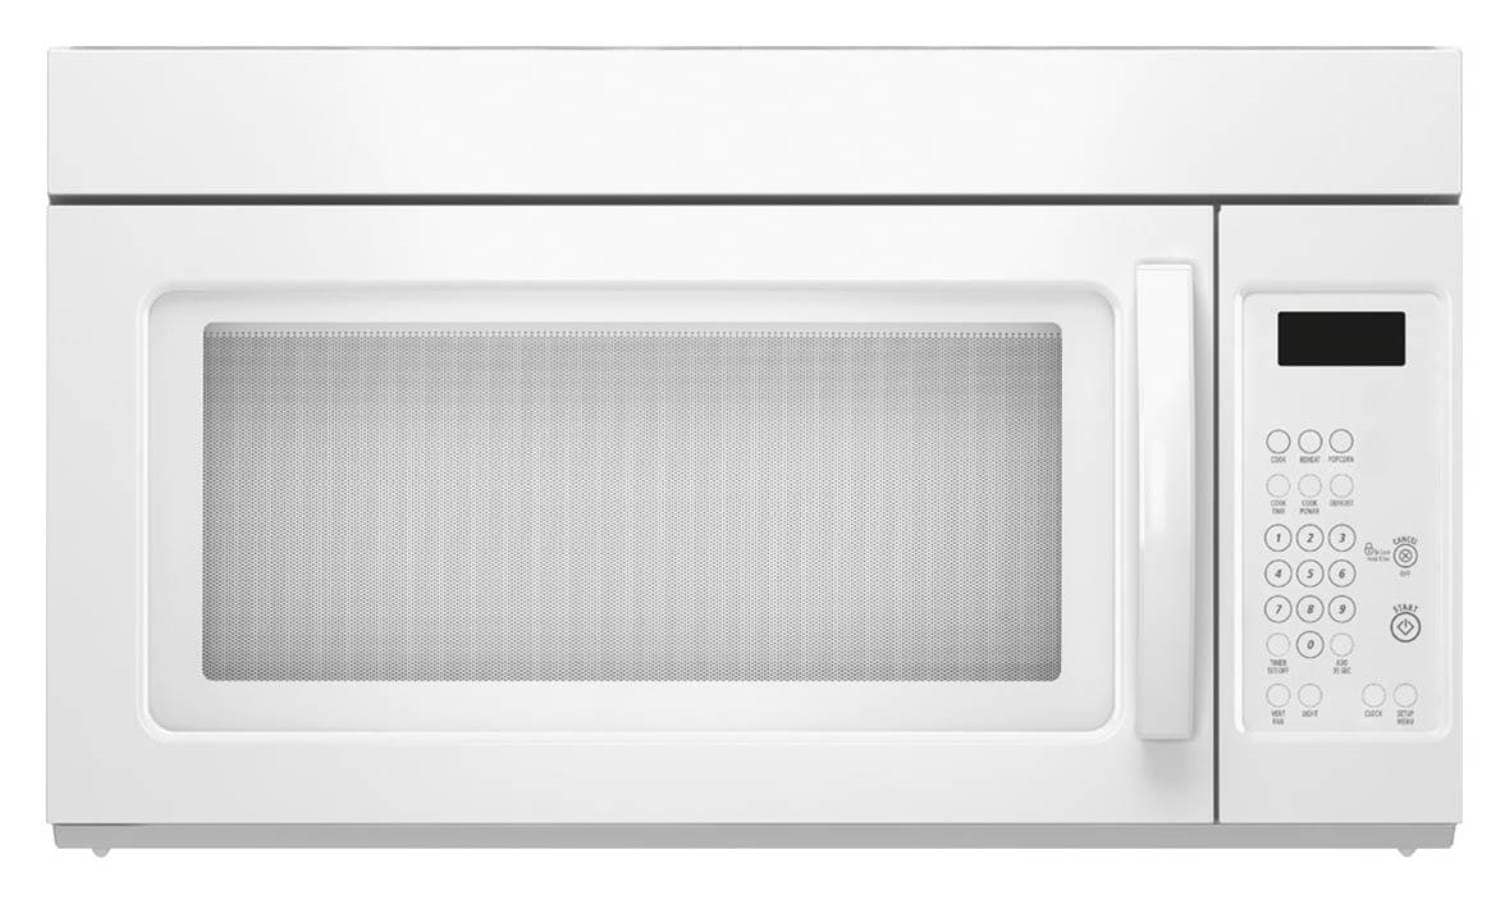  Microwave Oven 1.1 Cubic Foot Capacity 14 Inch Height X 20-1/2  Inch Width X 18-1/2 Inch Depth With Convection Oven S: Home & Kitchen